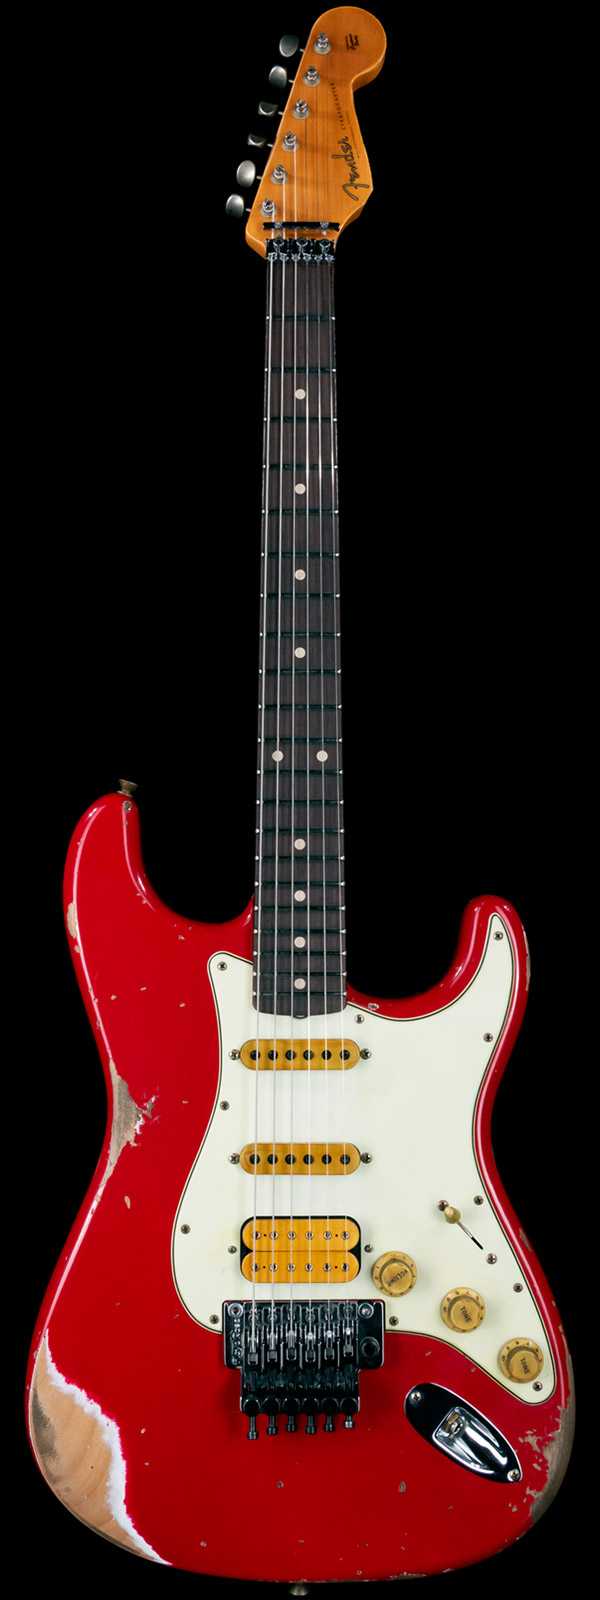 Fender Custom Shop Alley Cat Stratocaster Heavy Relic HSS Rosewood Board Floyd Rose Torino Red